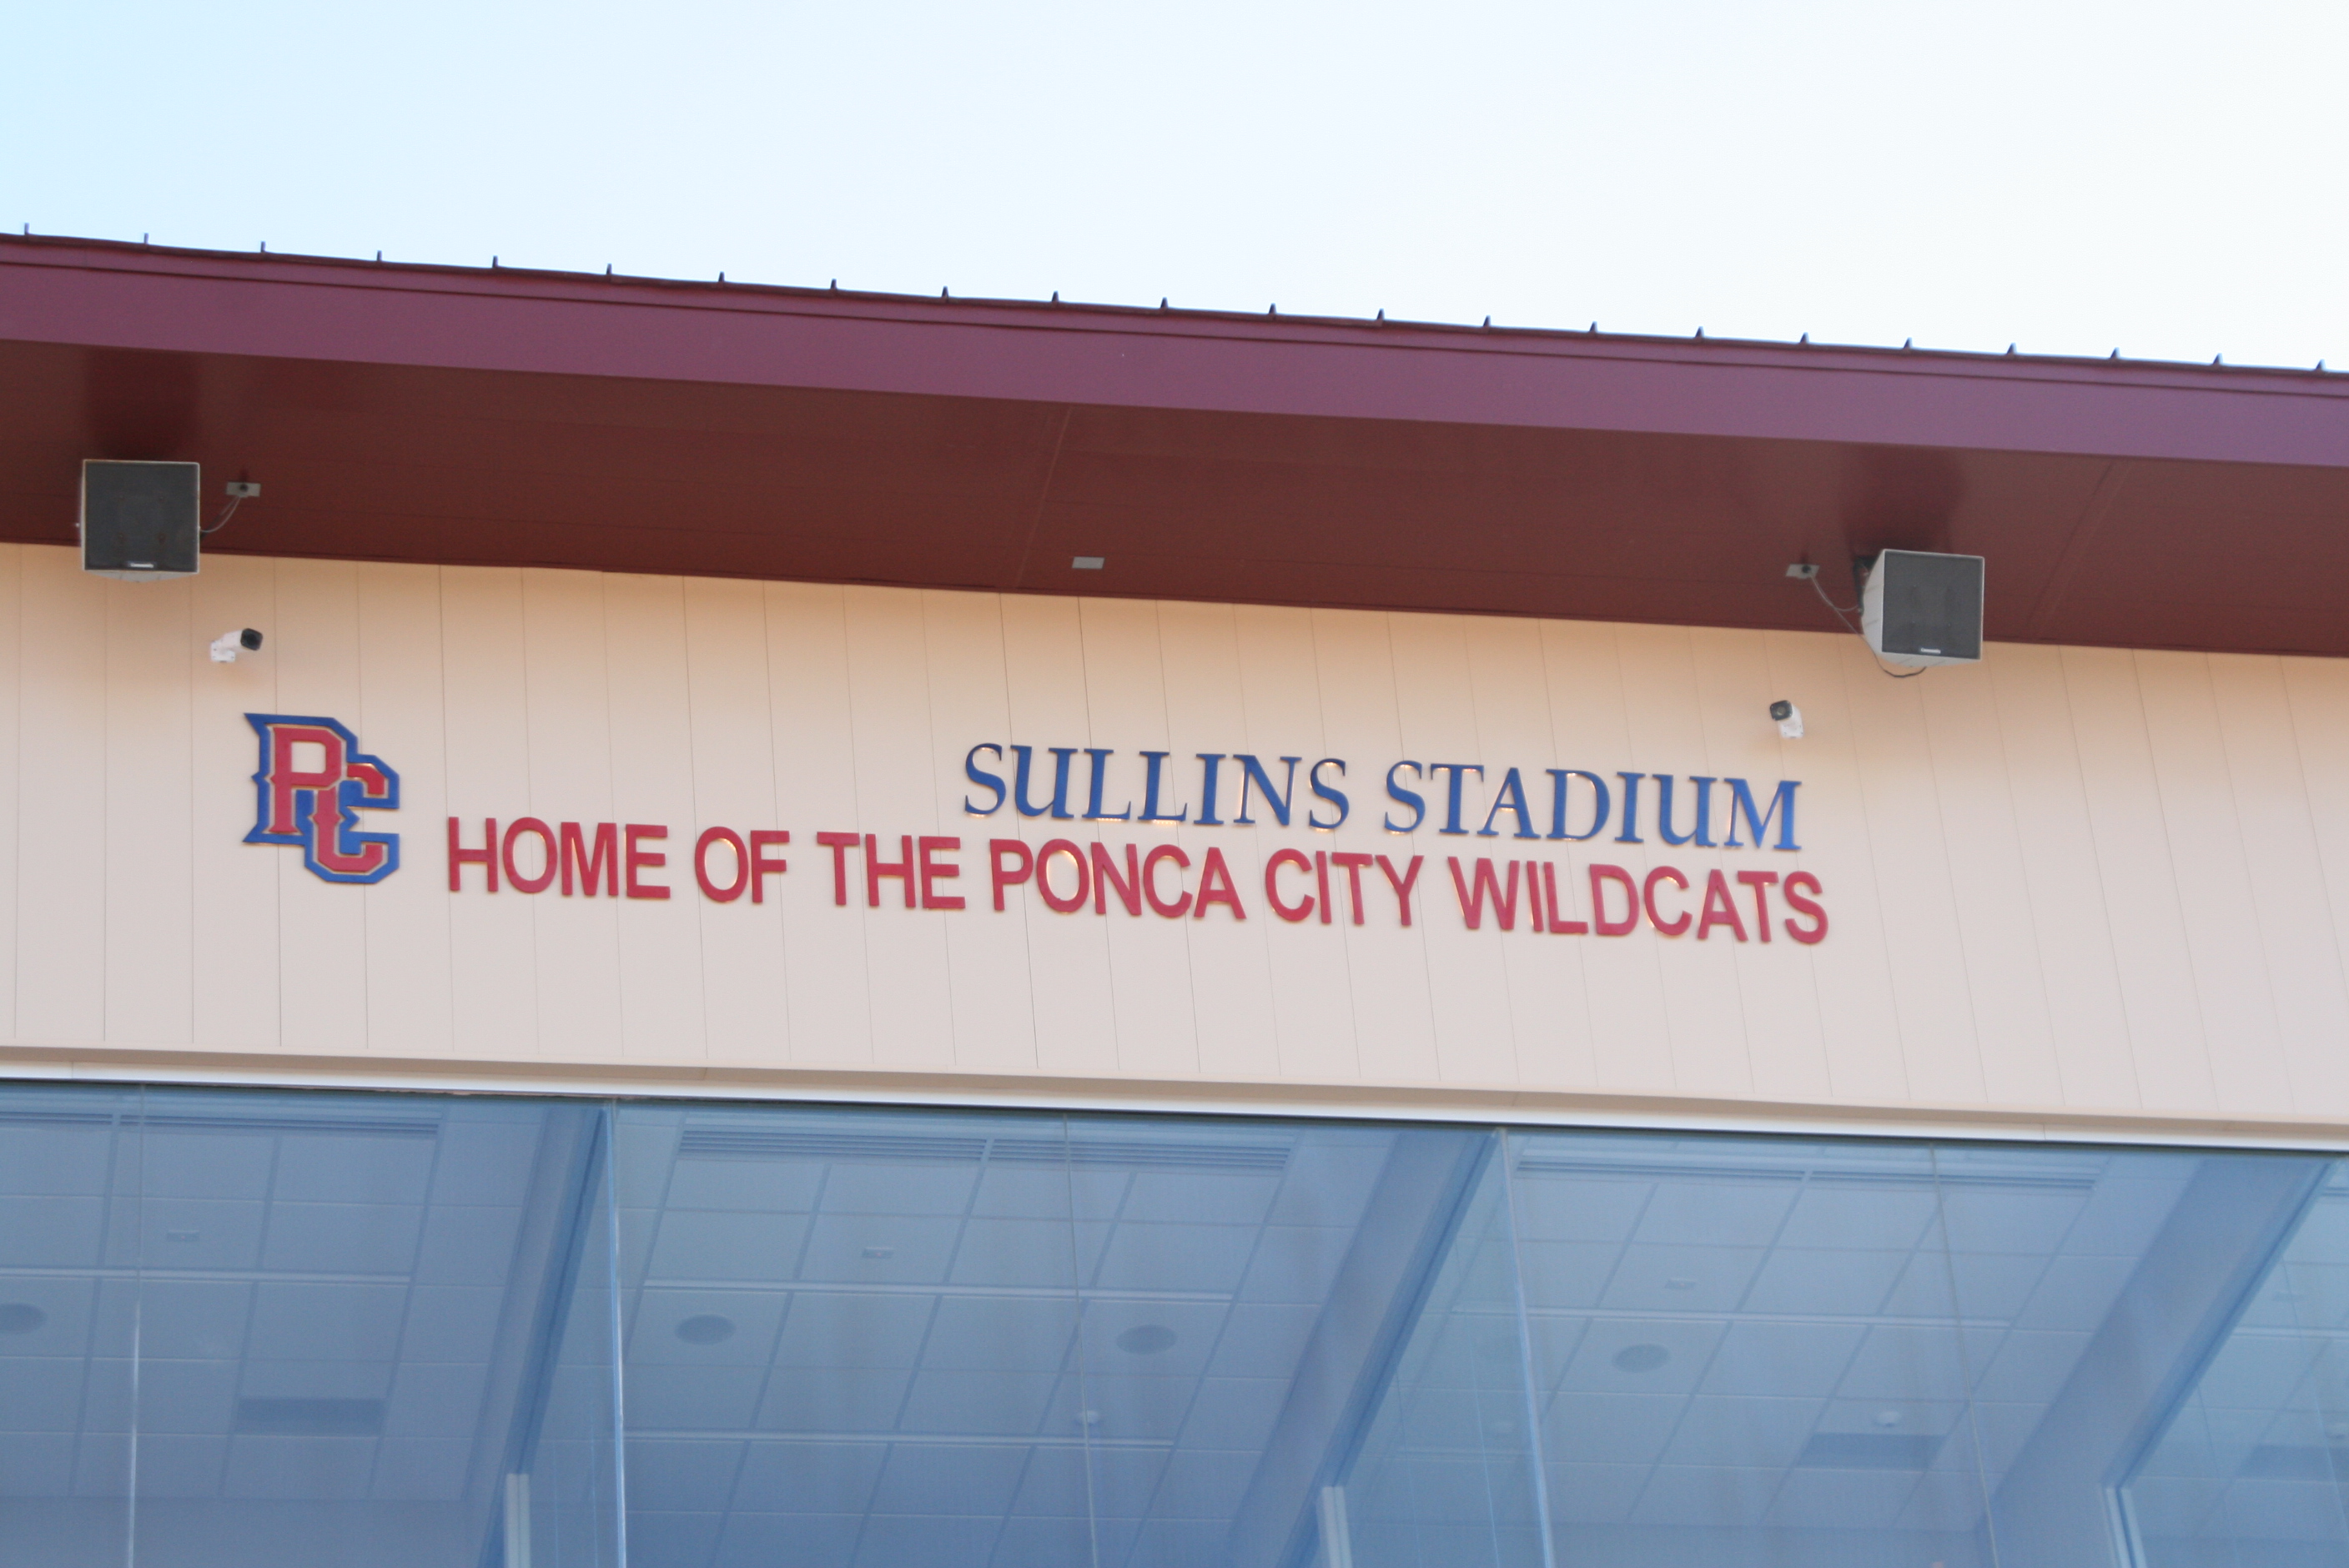 Ponca City Wildcat Football Game This Thursday, Construction Changing Parking Around Sullins Stadium